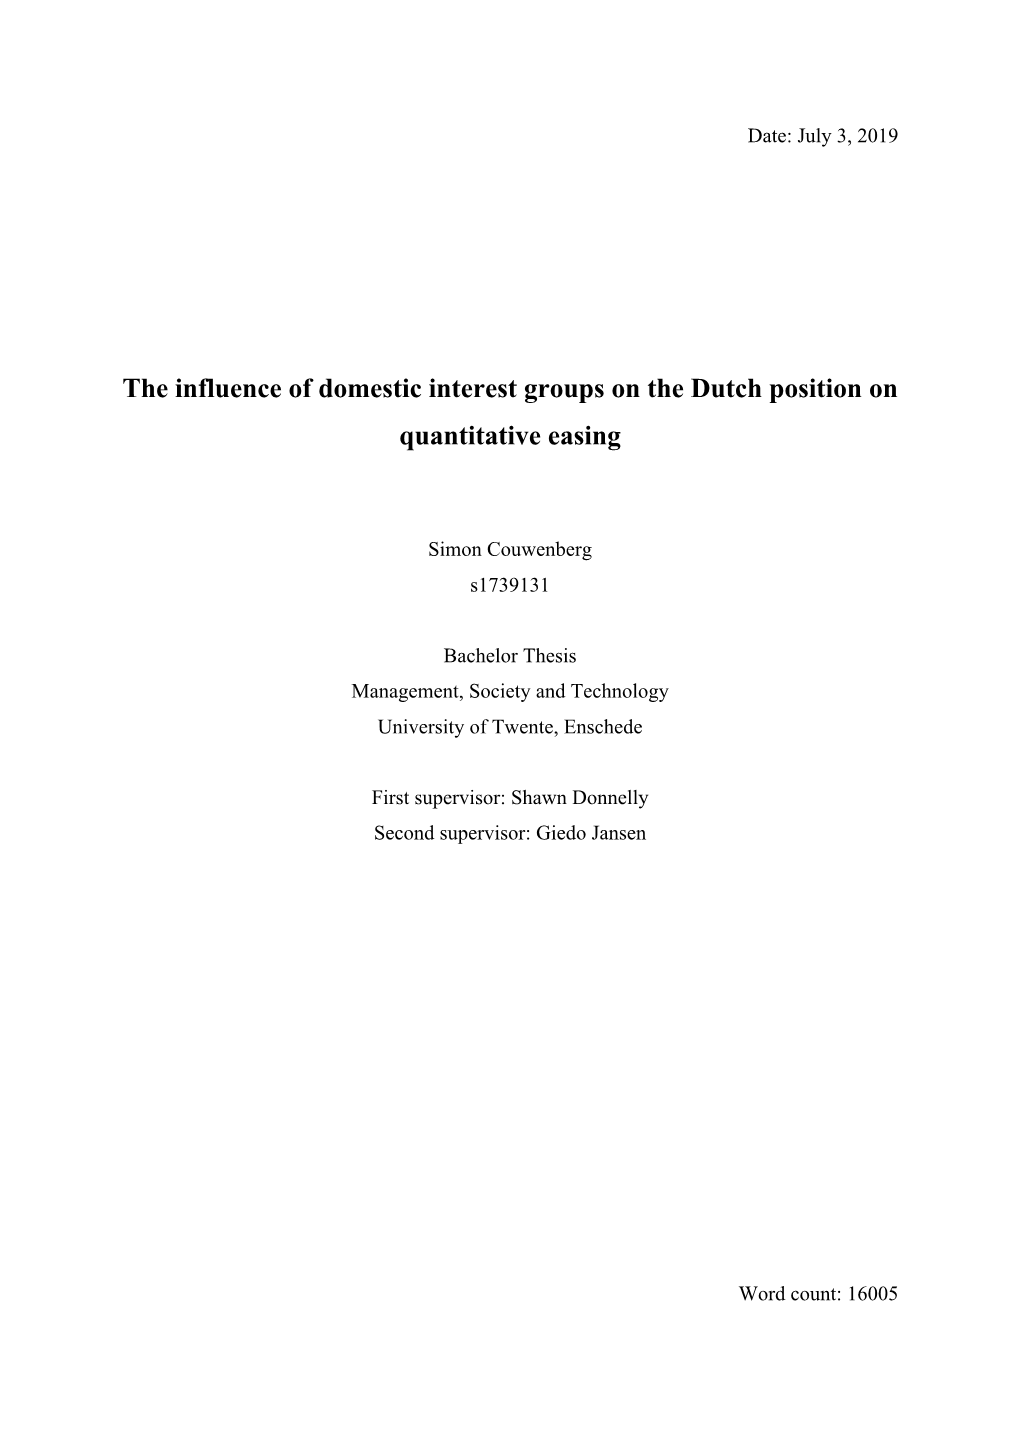 The Influence of Domestic Interest Groups on the Dutch Position on Quantitative Easing